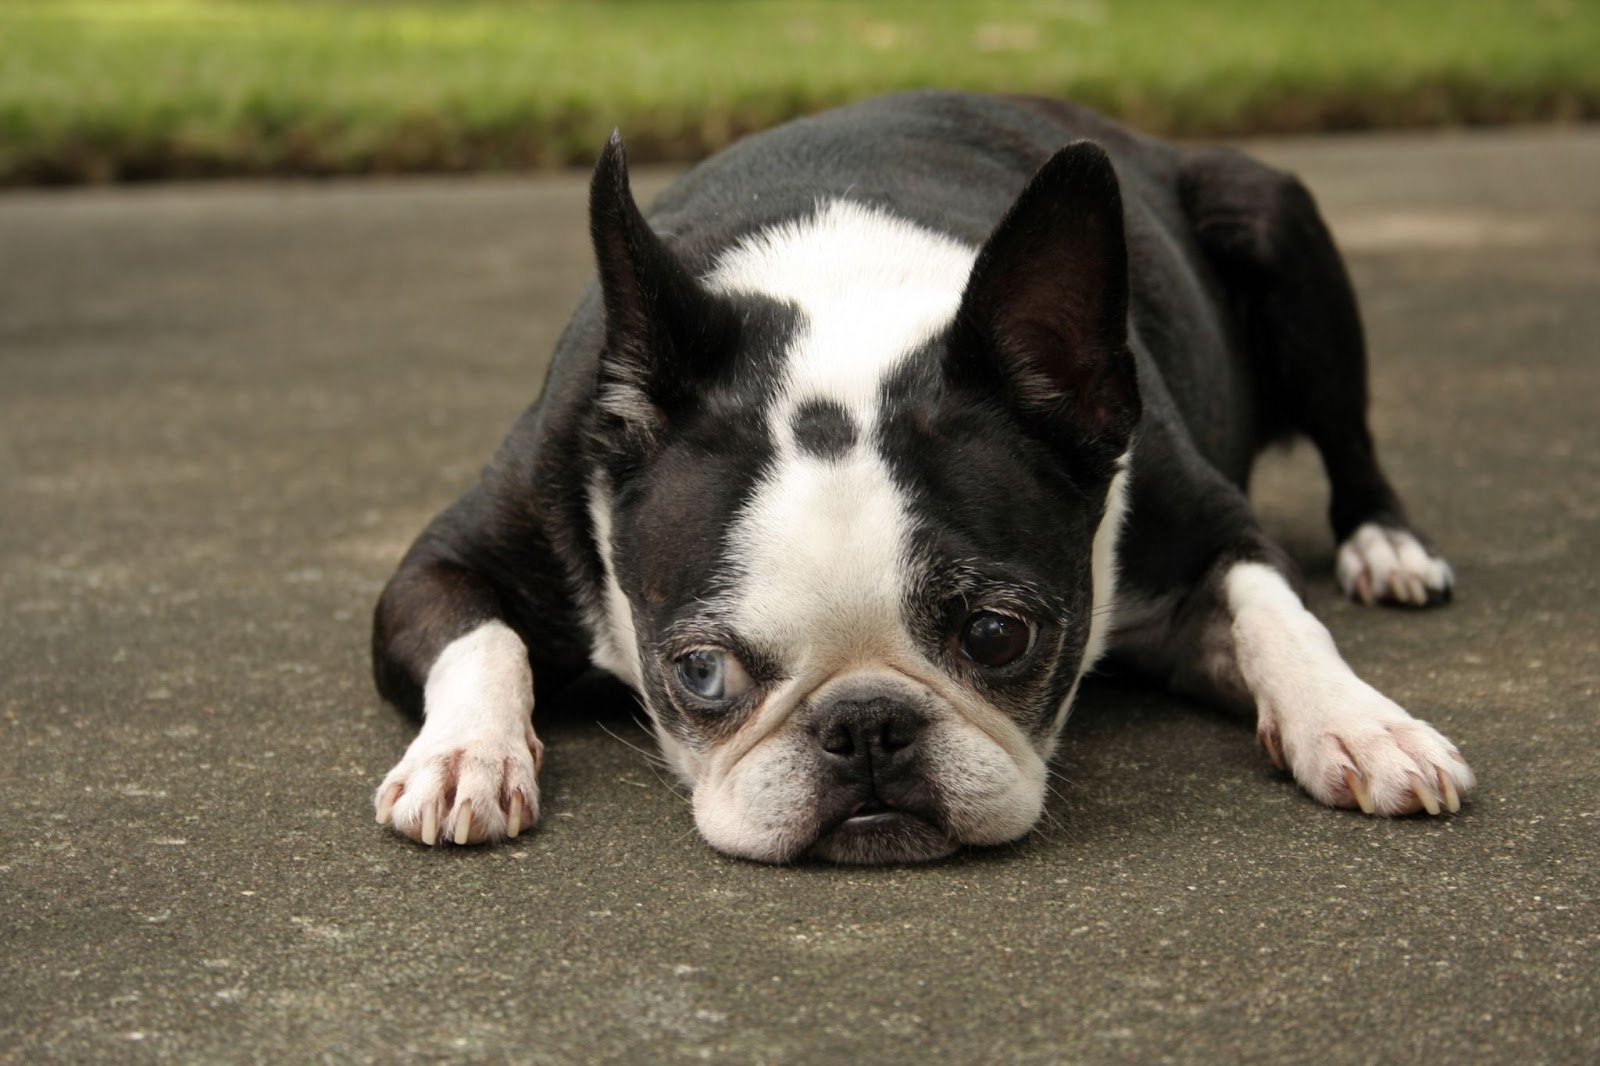 Boston Terrier lying down with Haggerty spot visible on head